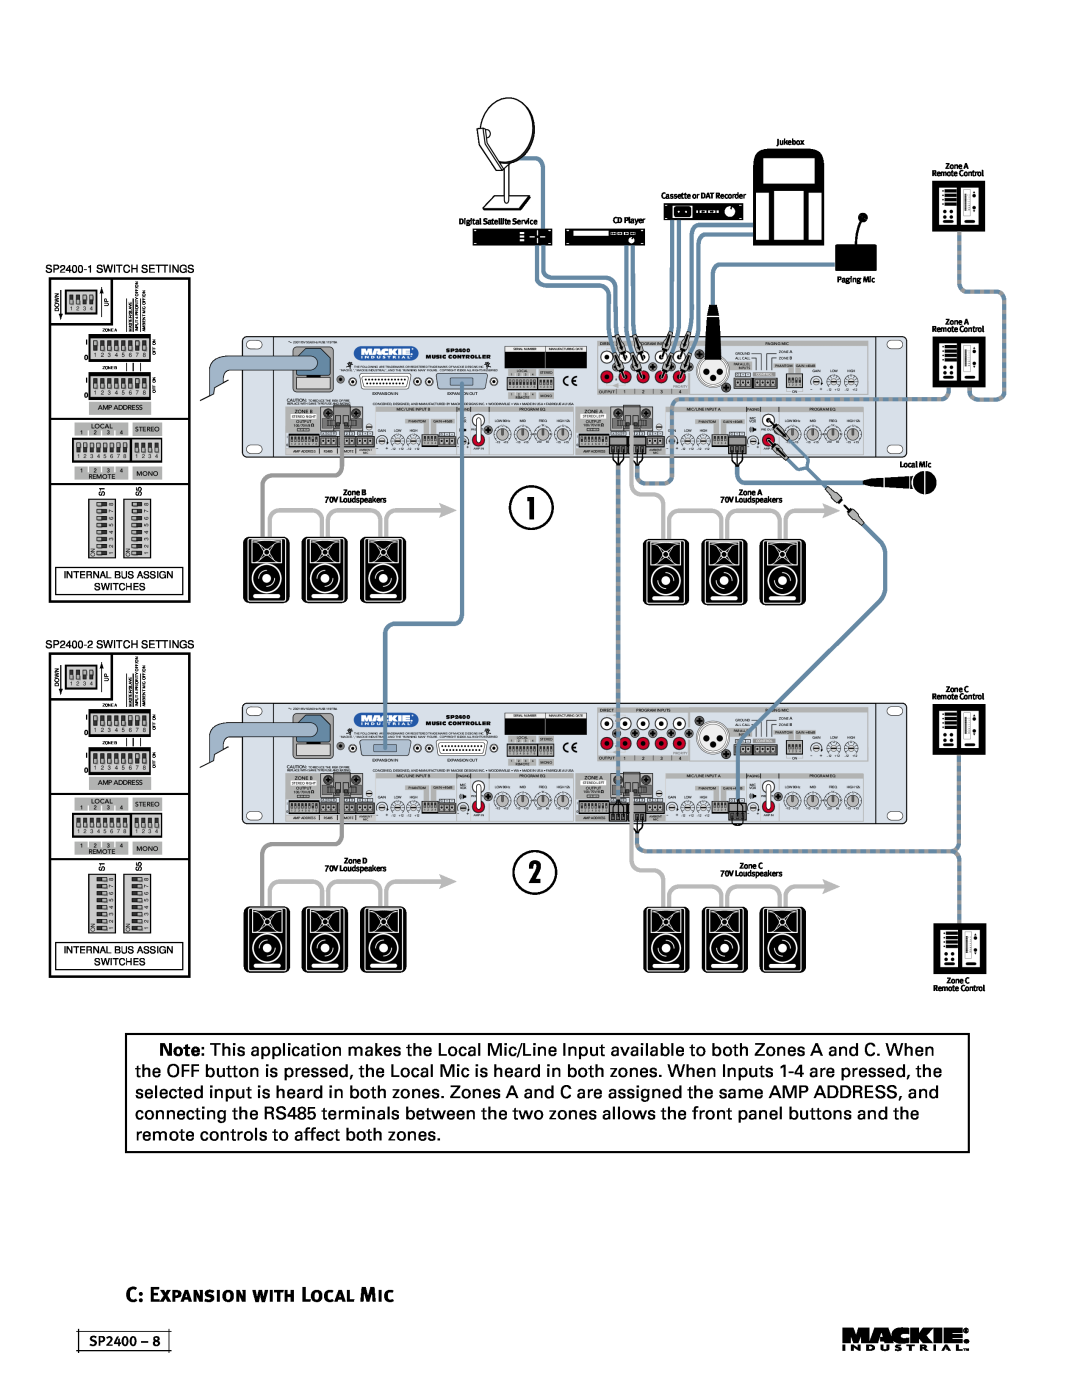 Mackie C Expansion with Local Mic, SP2400-1SWITCH SETTINGS, SP2400-2SWITCH SETTINGS, Internal Bus Assign Switches 